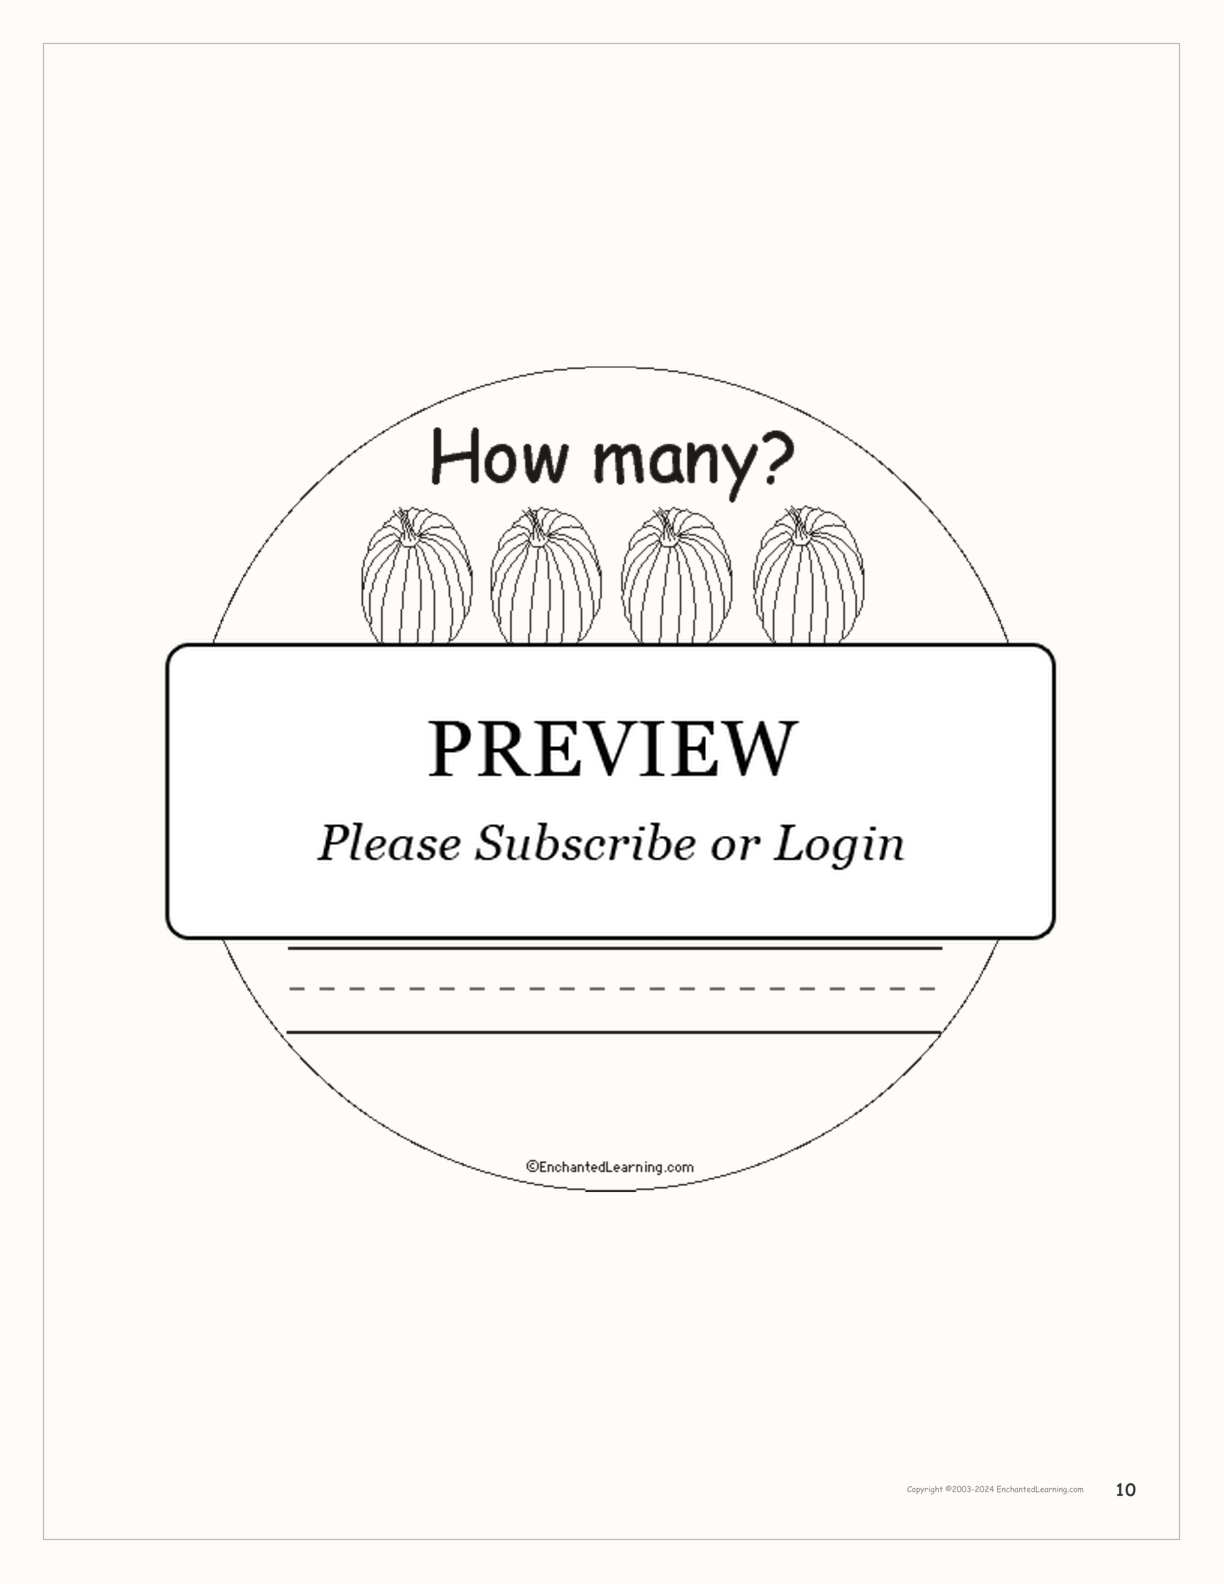 How Many Pumpkins? interactive printout page 10